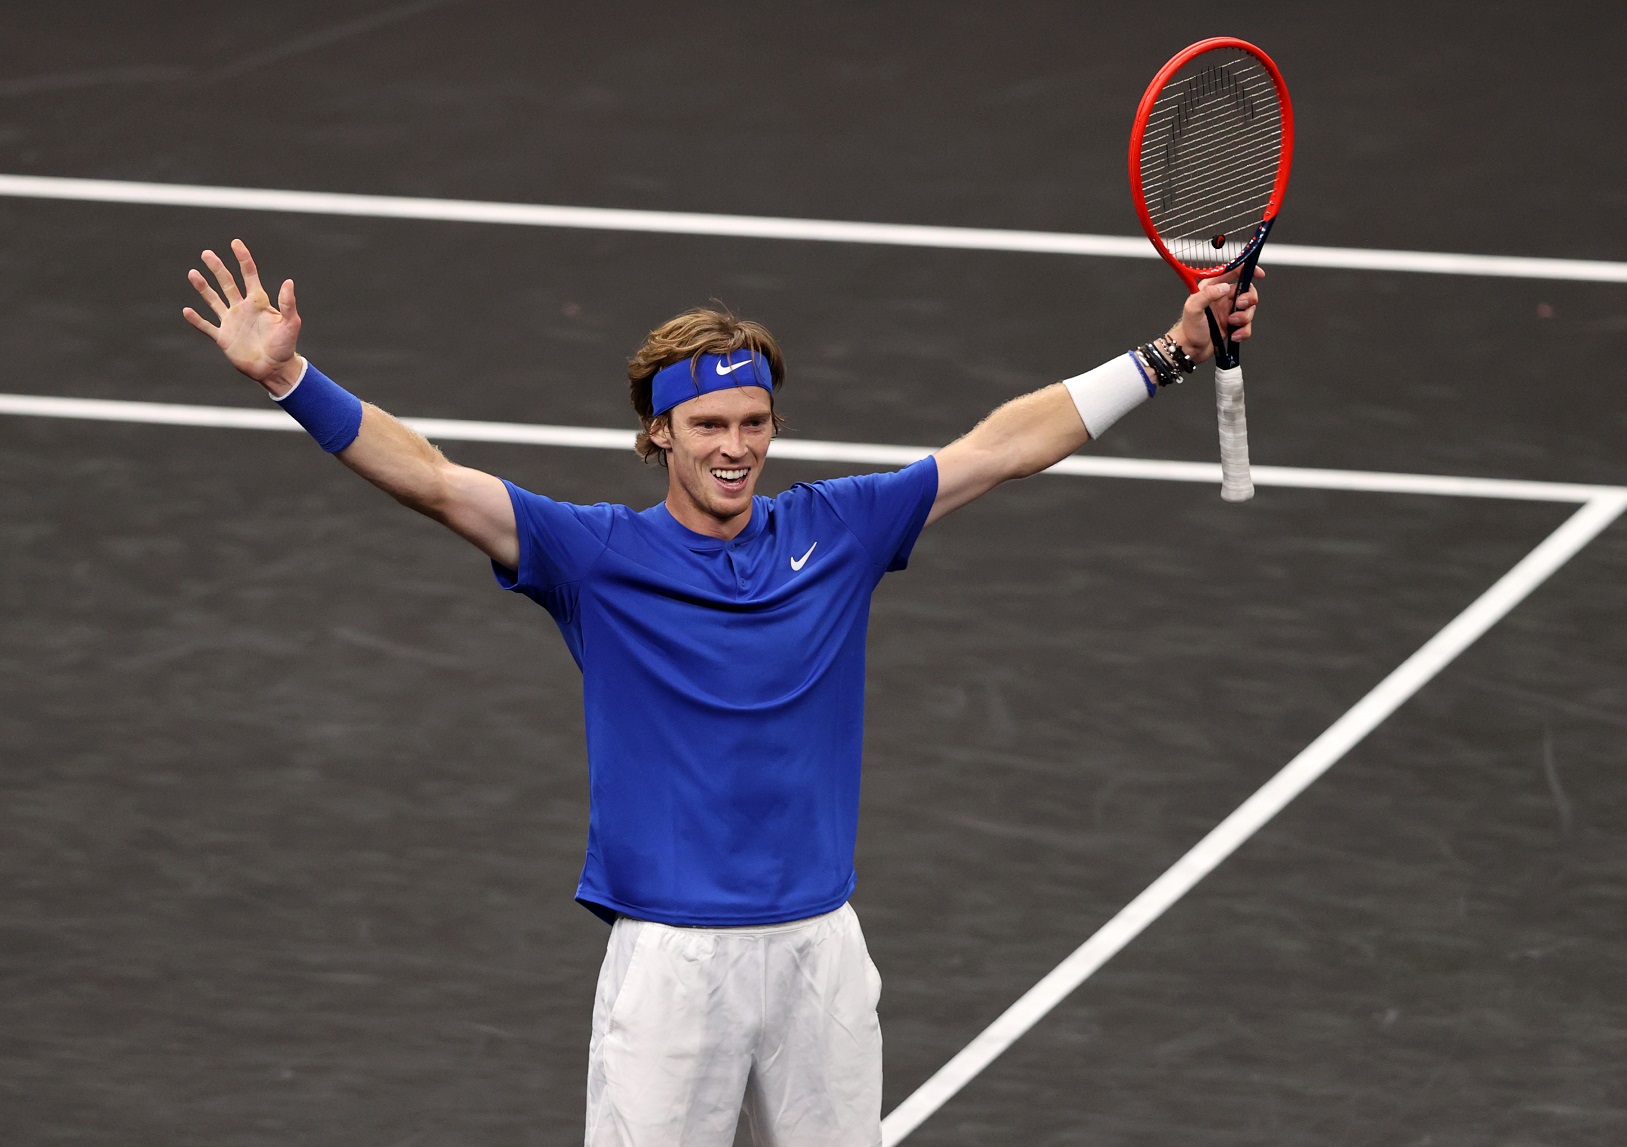 From Russia With Love! Andrey Rublev Returns To The Mubadala World Tennis Championship